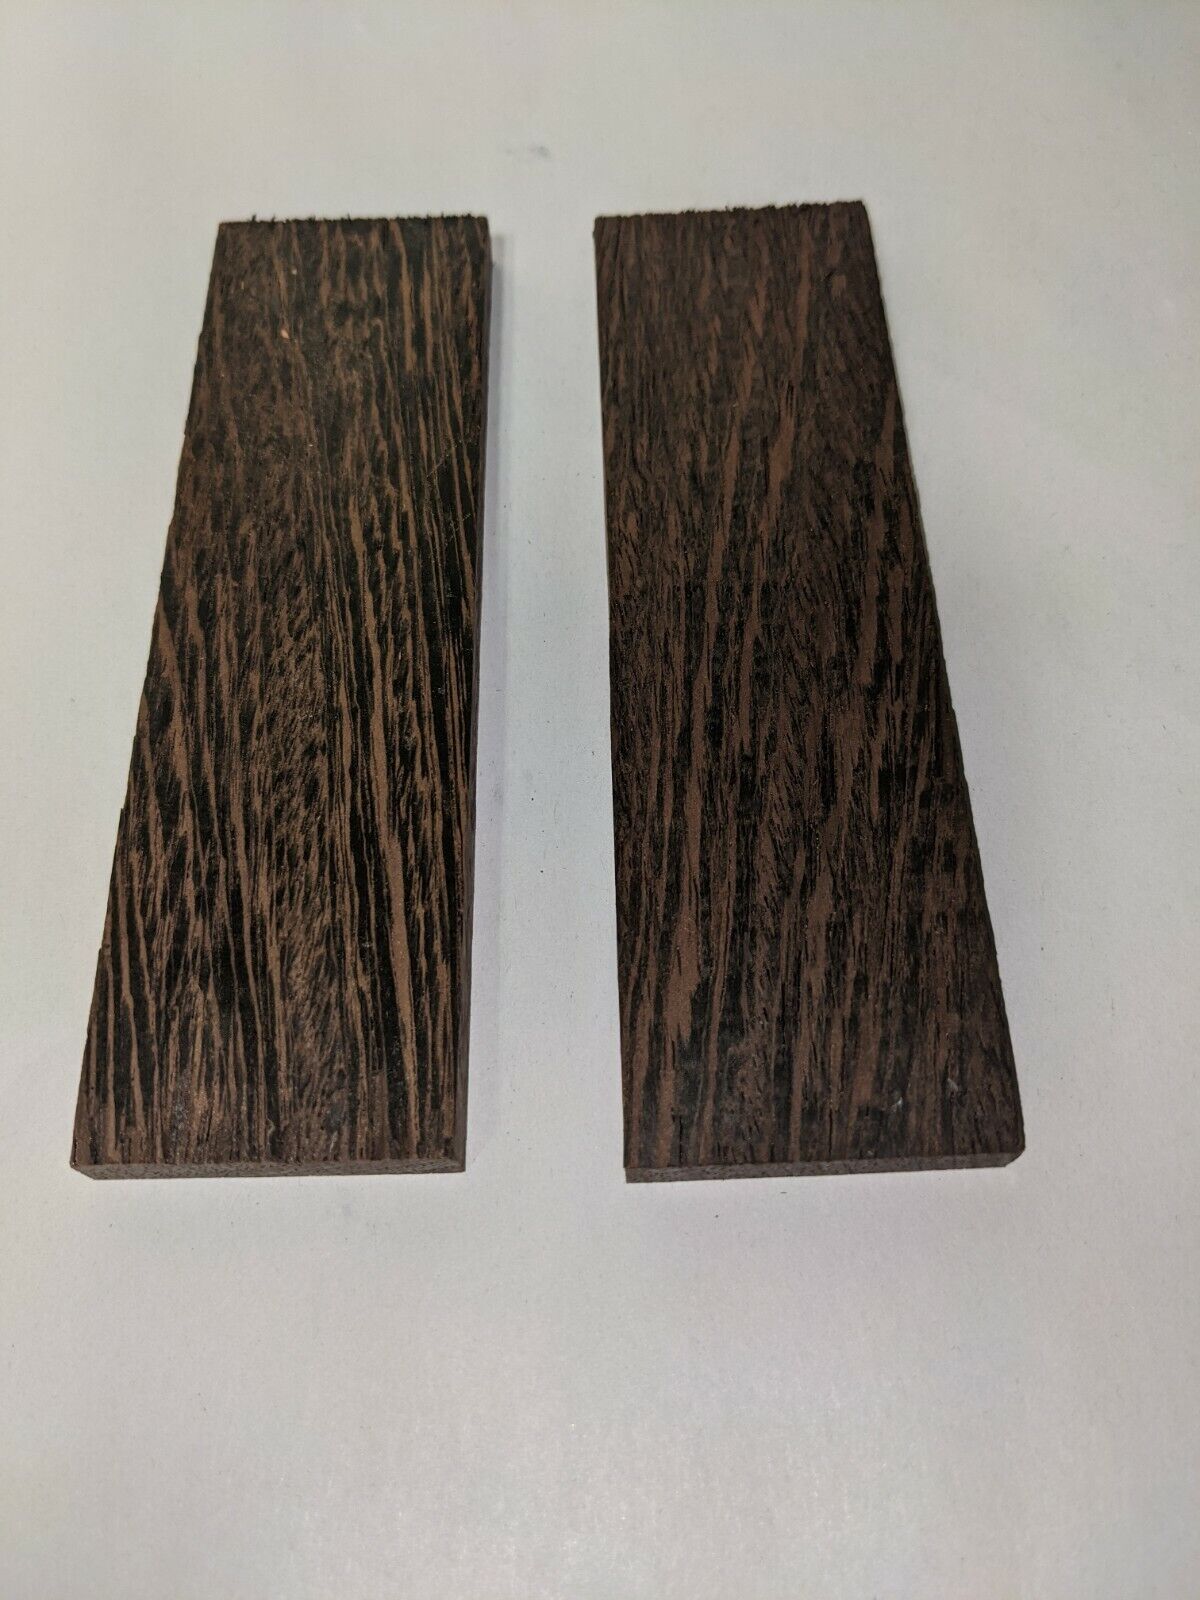 WENGE KNIFE SCALES (1 PAIR) Kiln Dried KNIFE HANDLE GRIPS BOOKMATCHED P